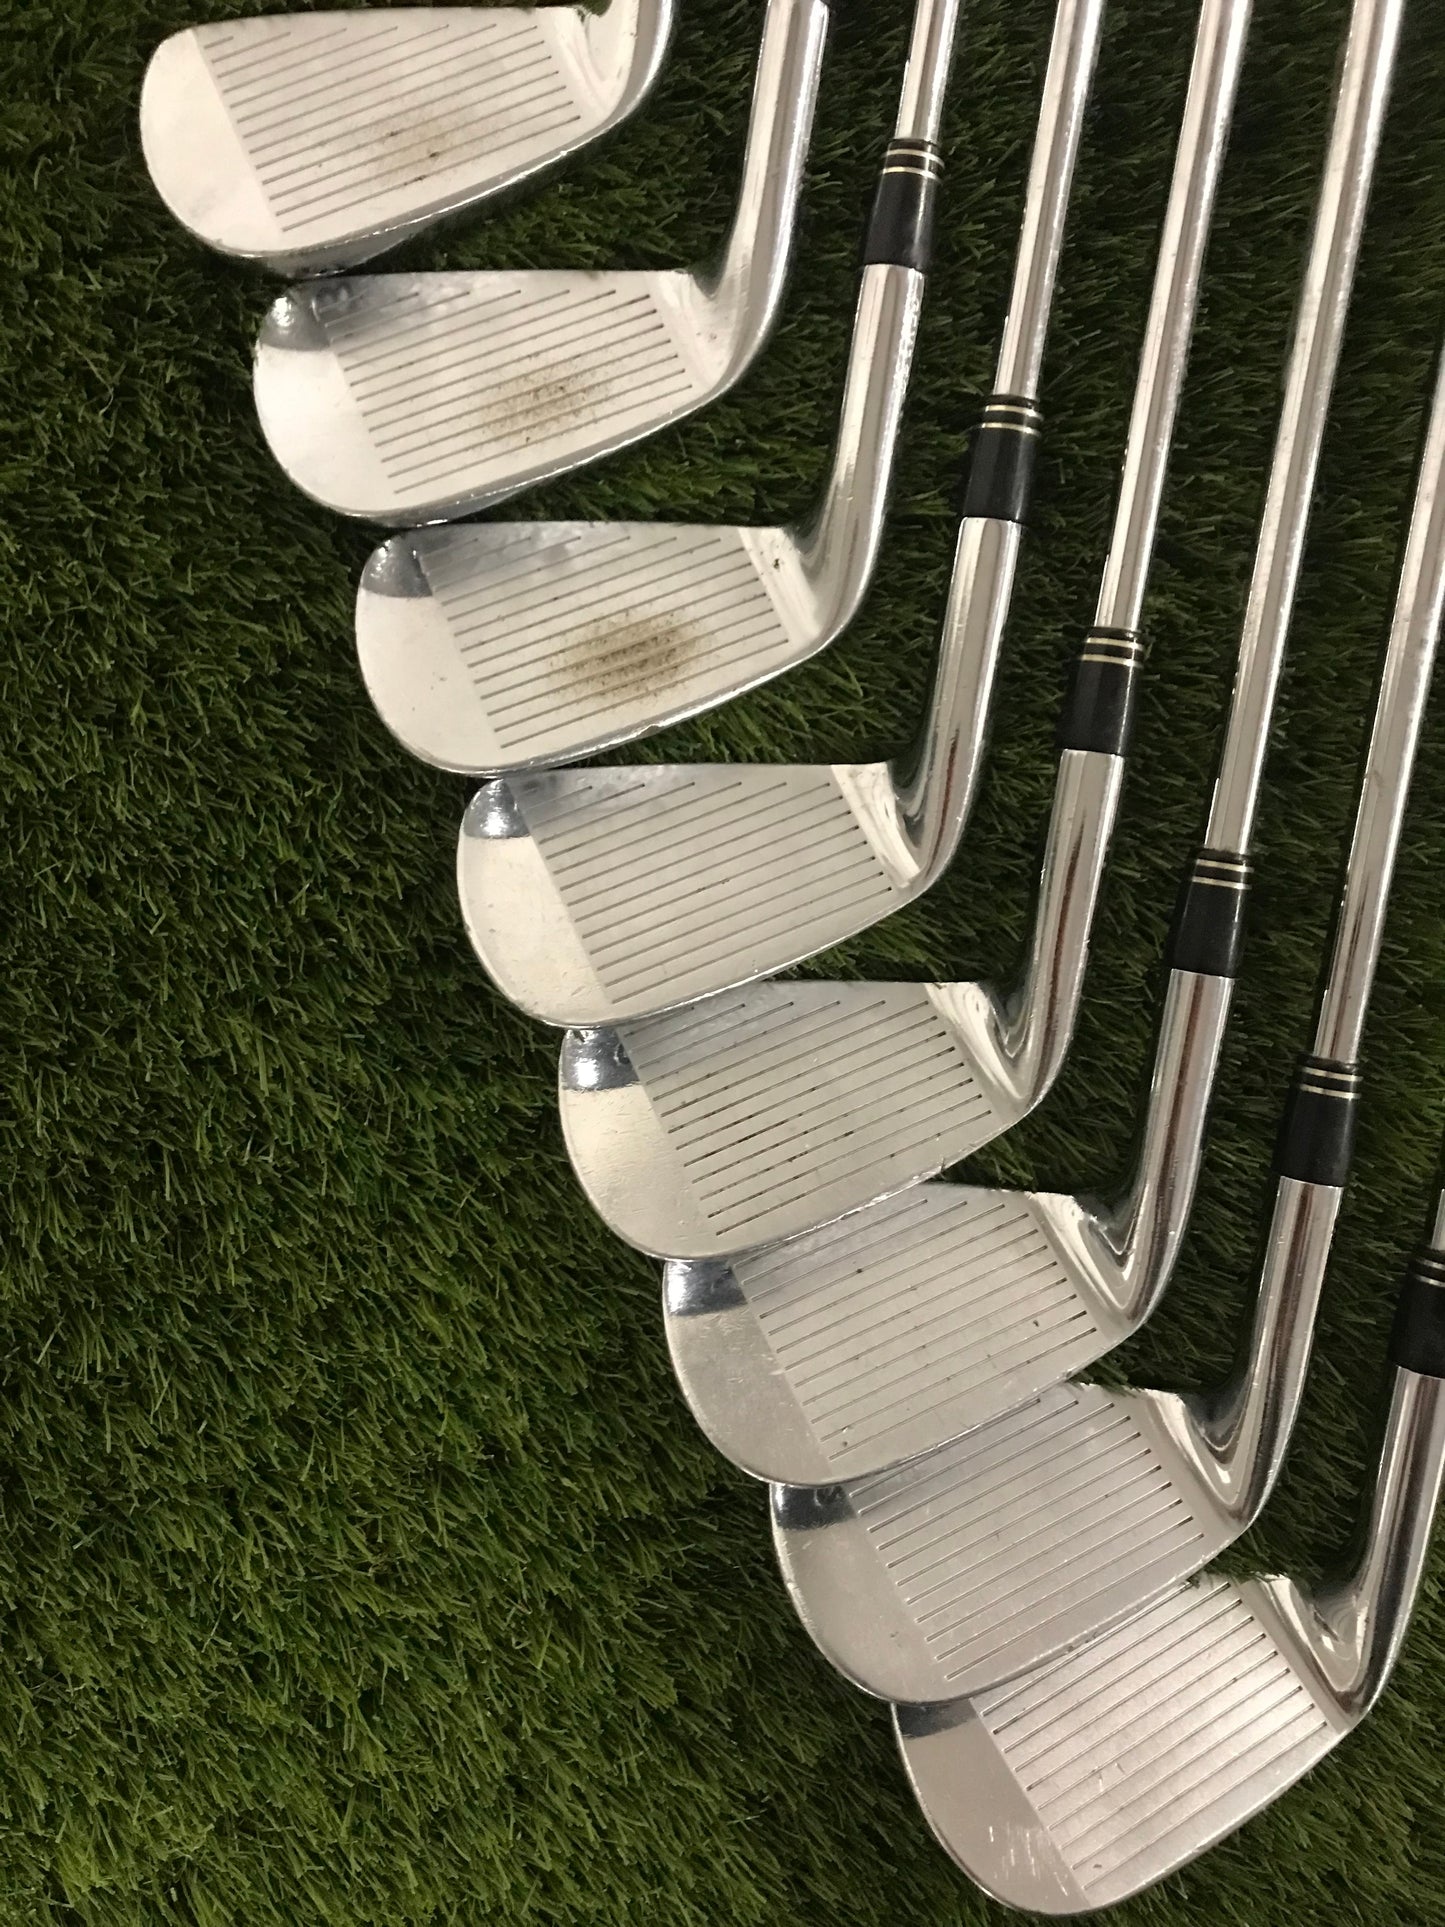 Taylormade R300 Irons 3-PW